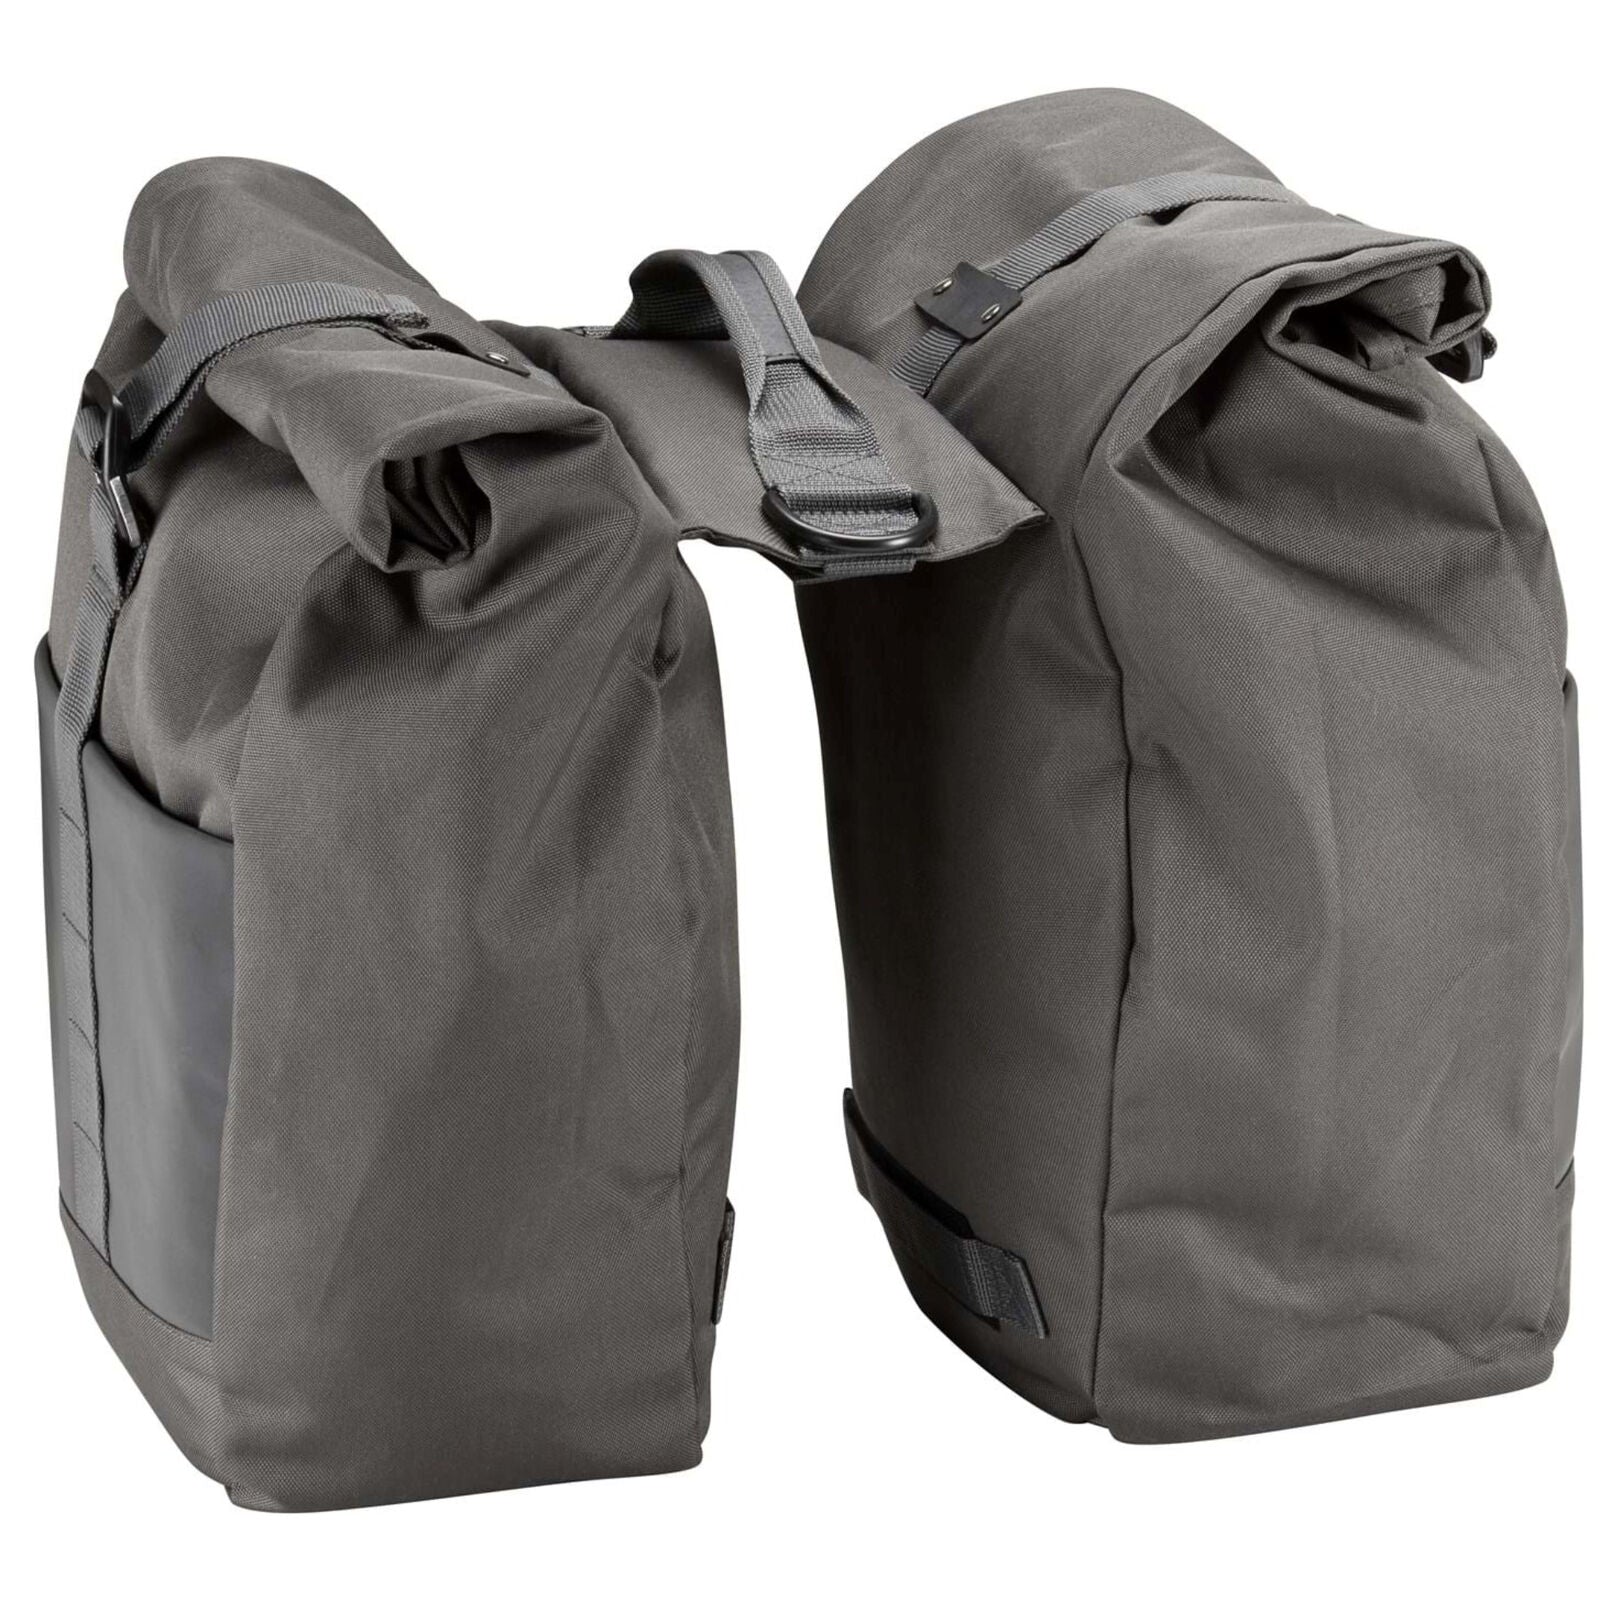 A pair of Altura Grid Cycling Pannier Roll Up bags, each with a 15L capacity, perfect for commuting, touring, and bike packing. Versatile roll-up design for compact storage, featuring reflective details, DWR finish, and roll-top closure. Ideal for carrying essentials with ease and staying visible in low light conditions.